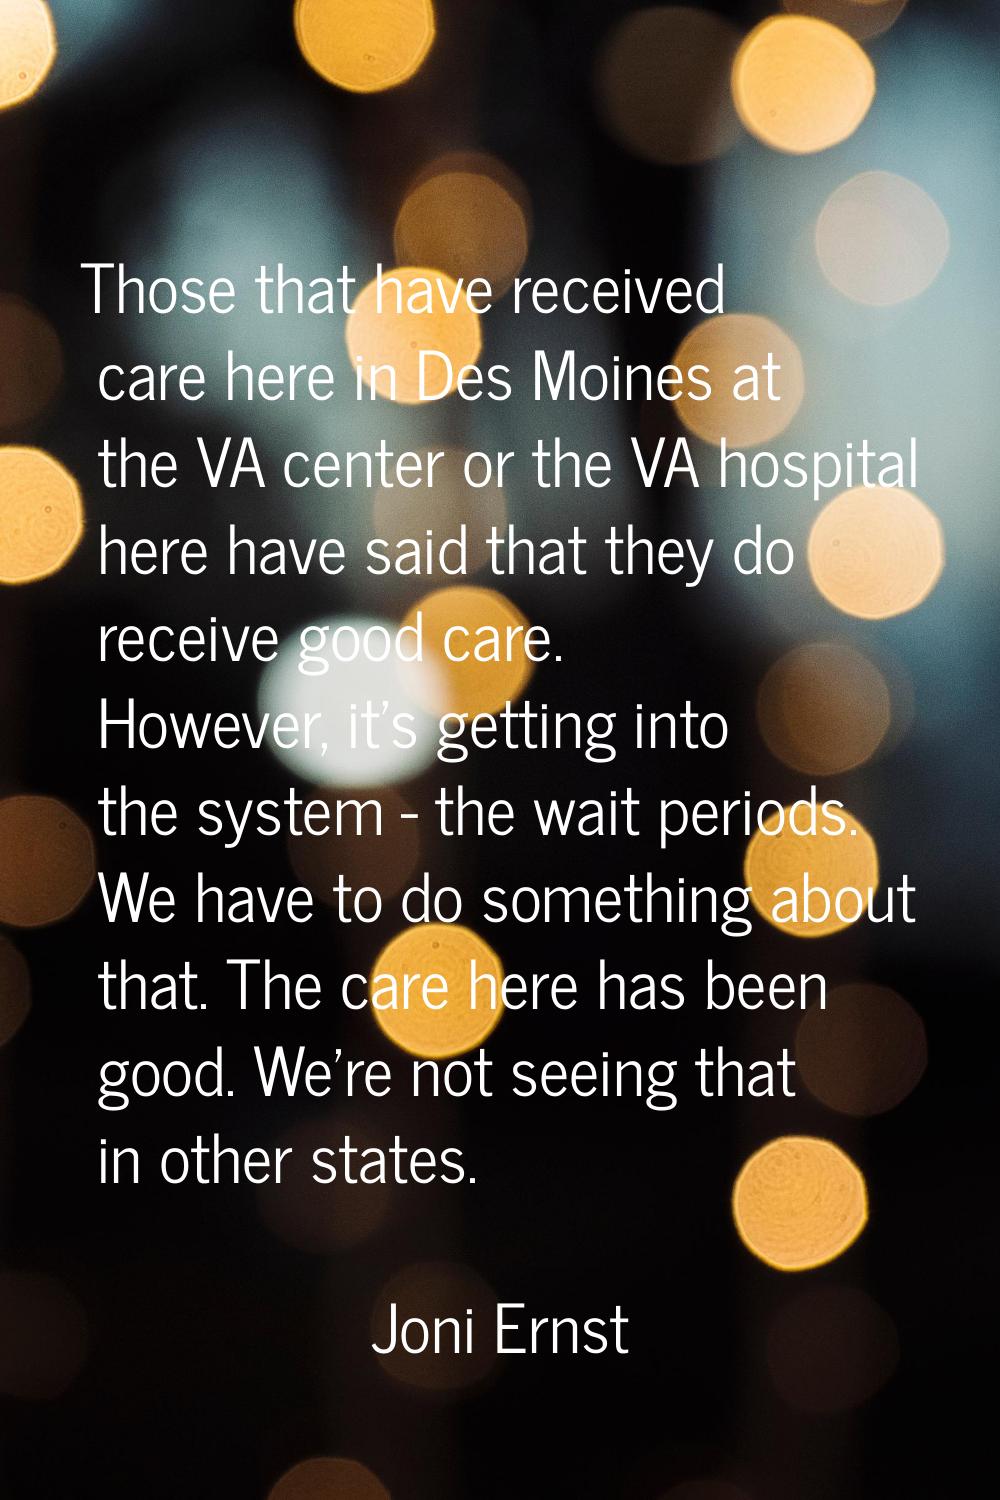 Those that have received care here in Des Moines at the VA center or the VA hospital here have said